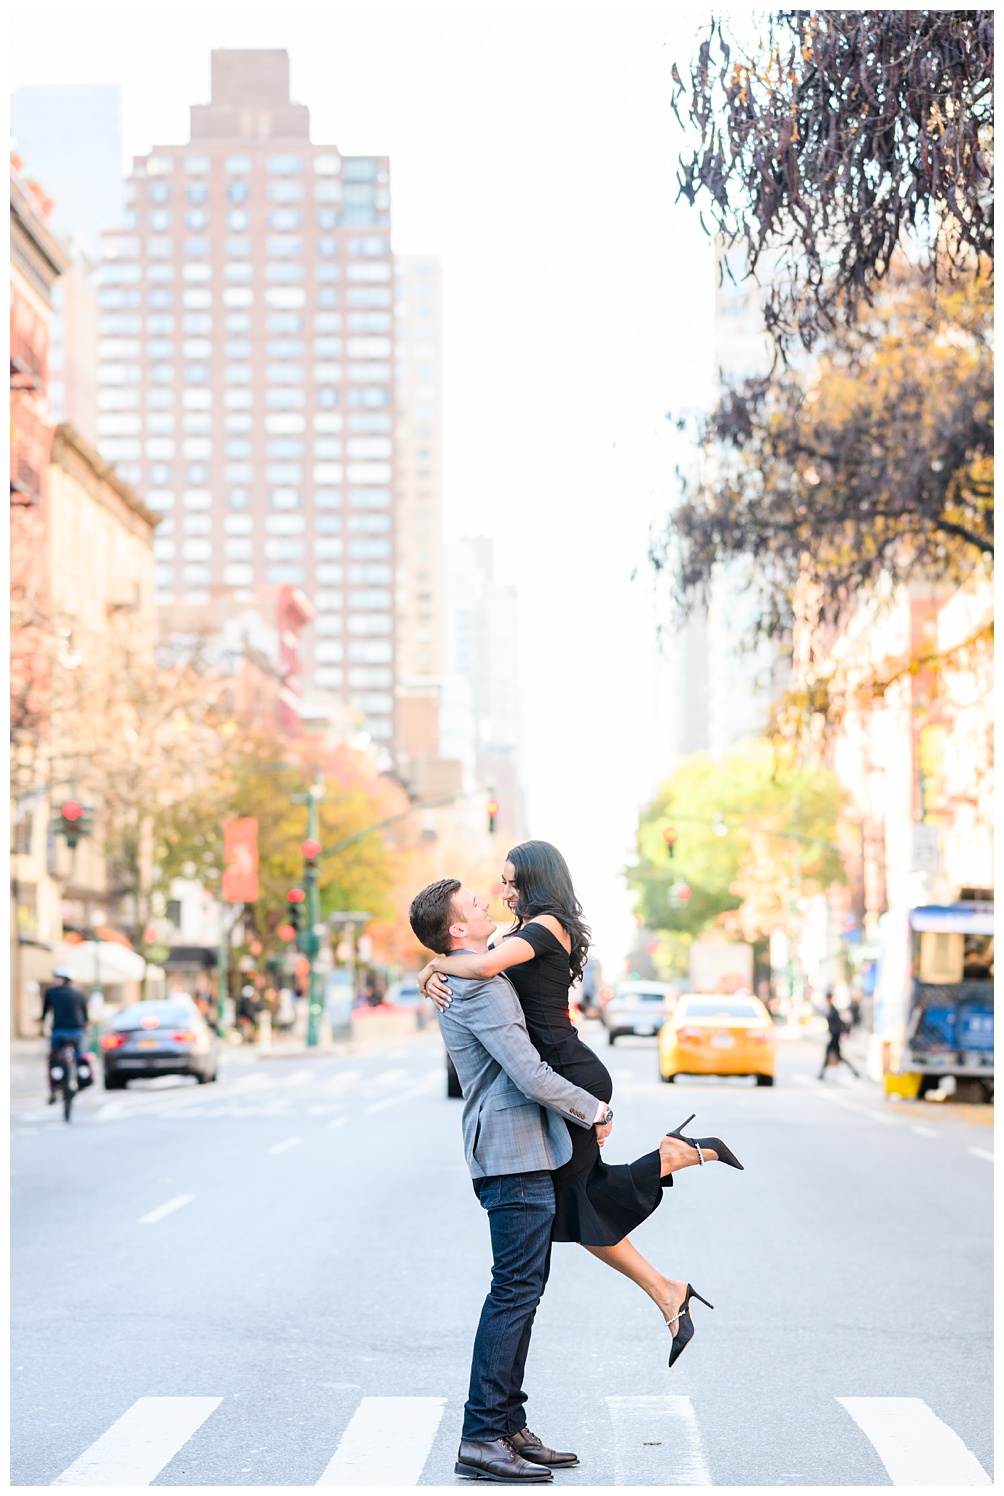 NYC engagement photos in the walkway with a taxi in the background